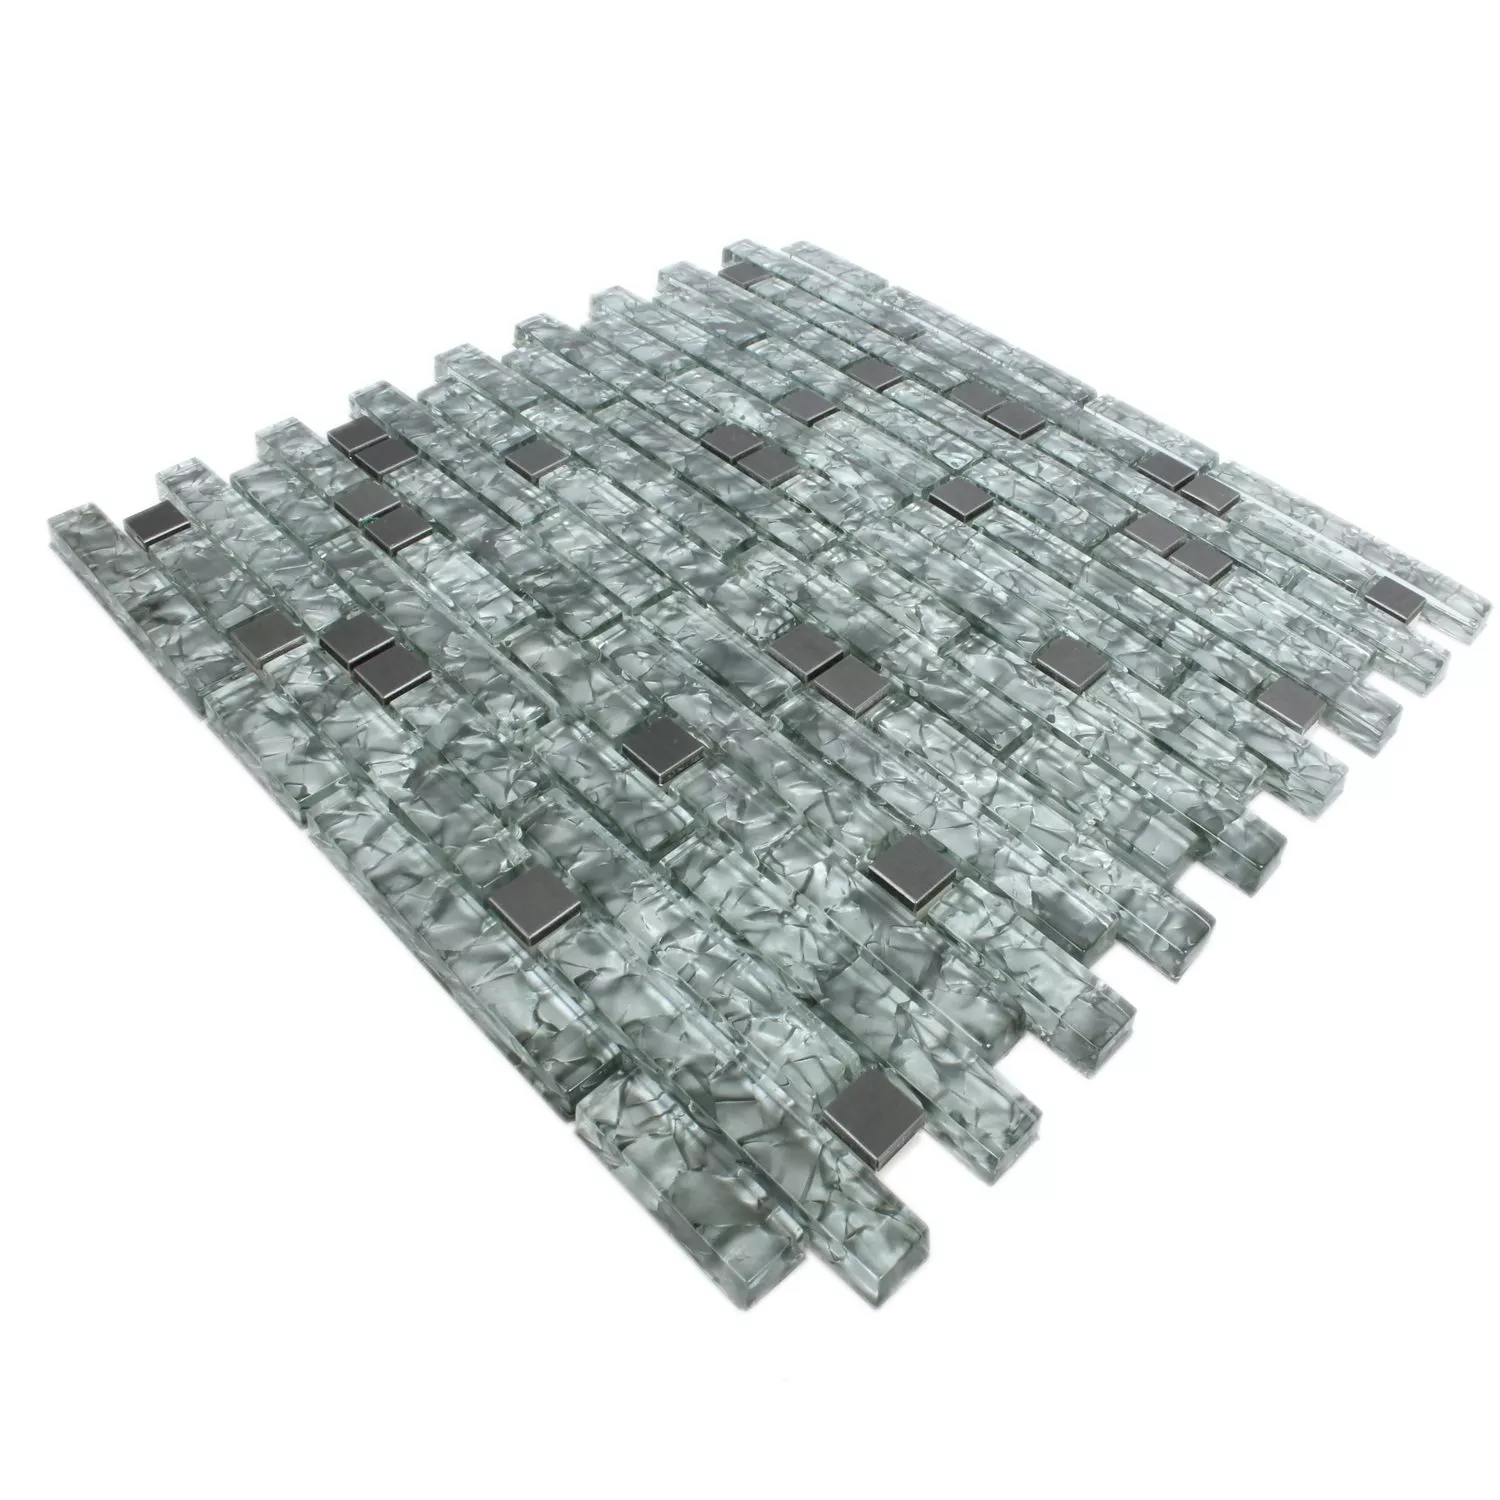 Sample Mosaic Tiles Zaide Stainless Steel Glass Mix Grey